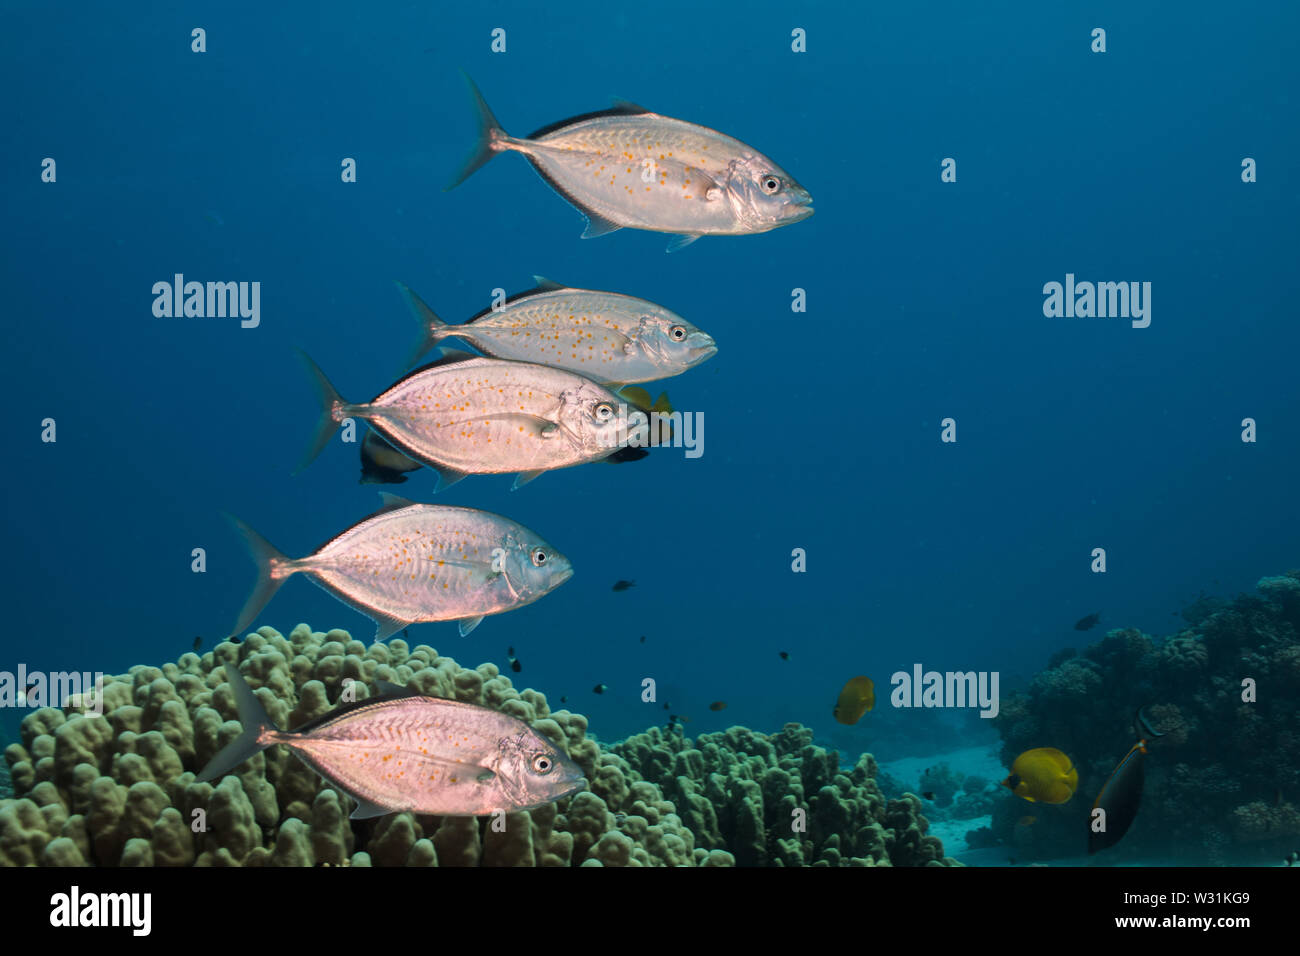 Orangespotted Trevally (Carangoides bajad) fish swimming over the reef. Silver fish with orange spots on the side of it's body. Stock Photo